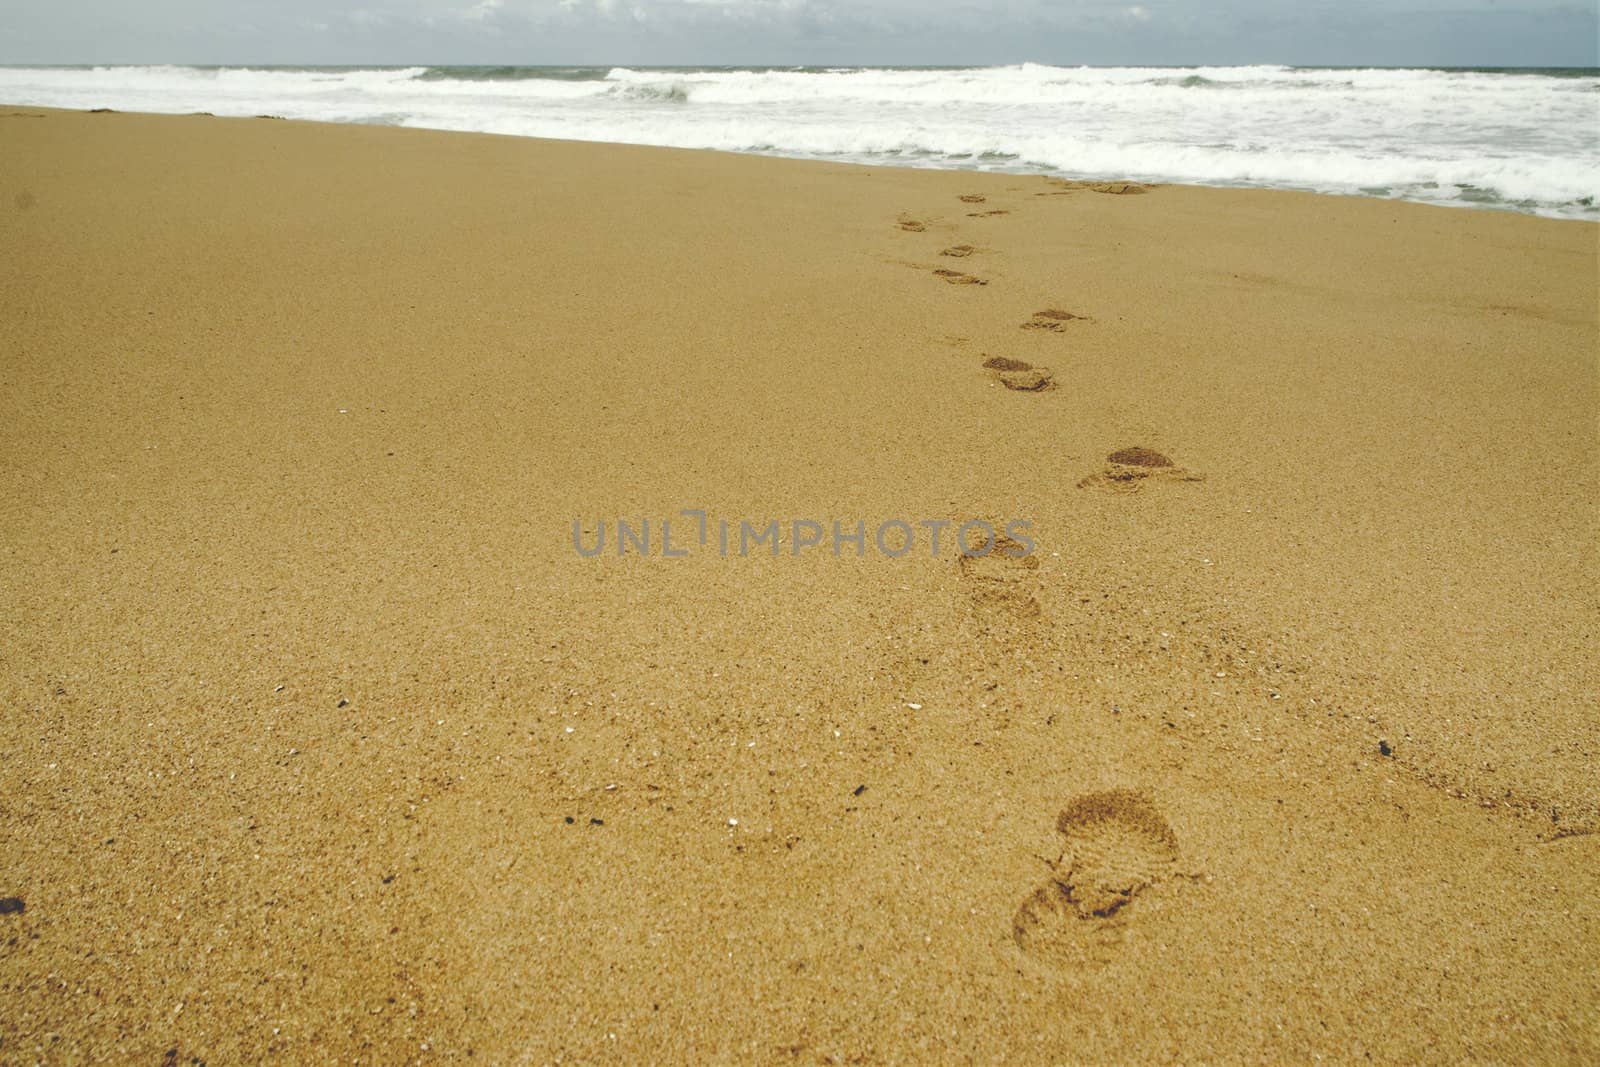 Footsteps at beach on a stormy day